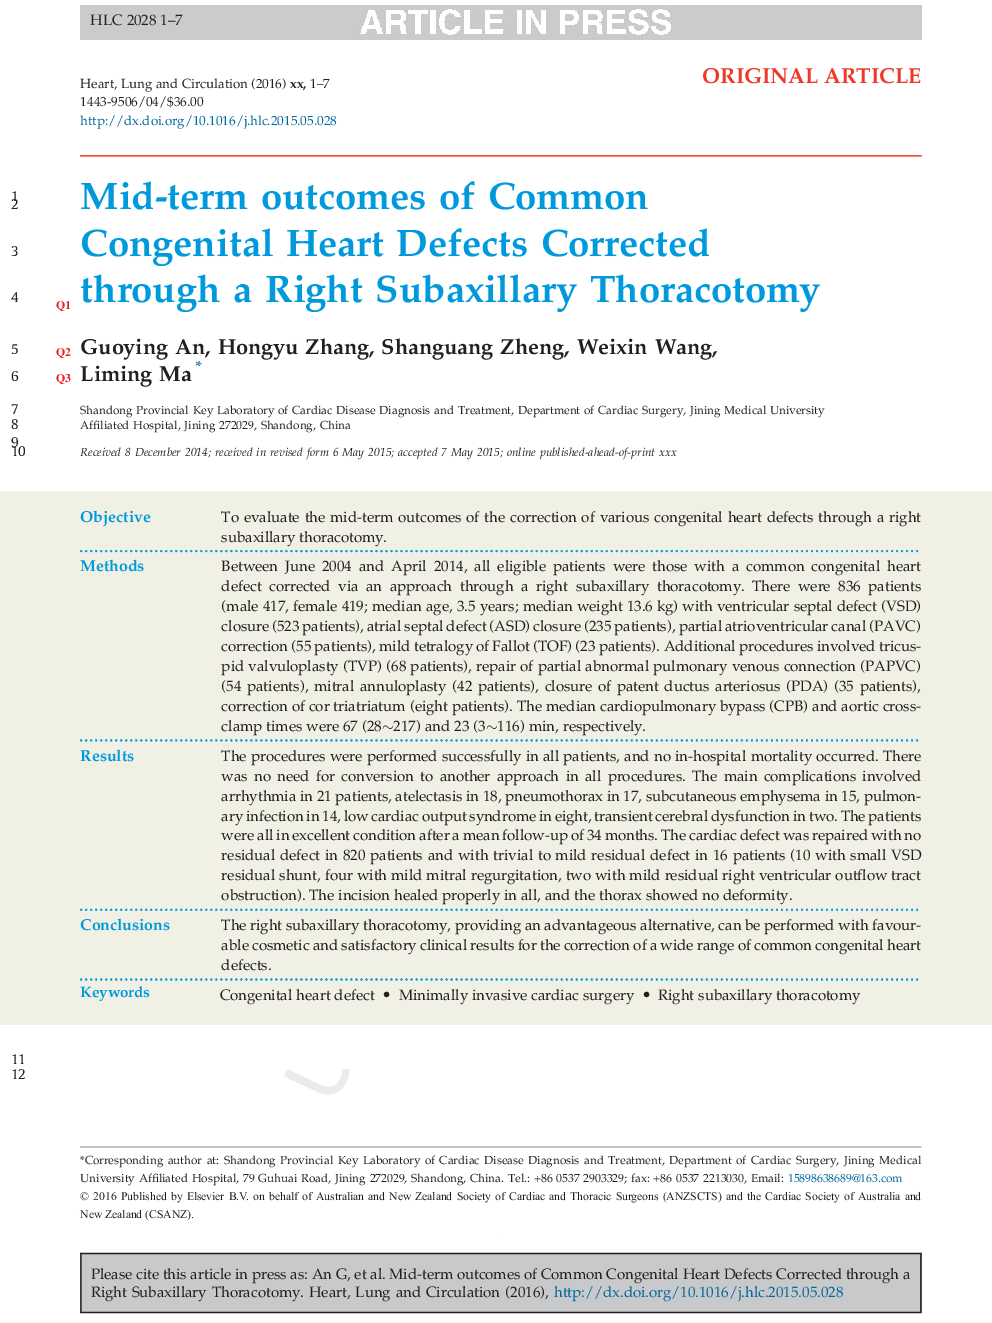 Mid-term Outcomes of Common Congenital Heart Defects Corrected Through a Right Subaxillary Thoracotomy